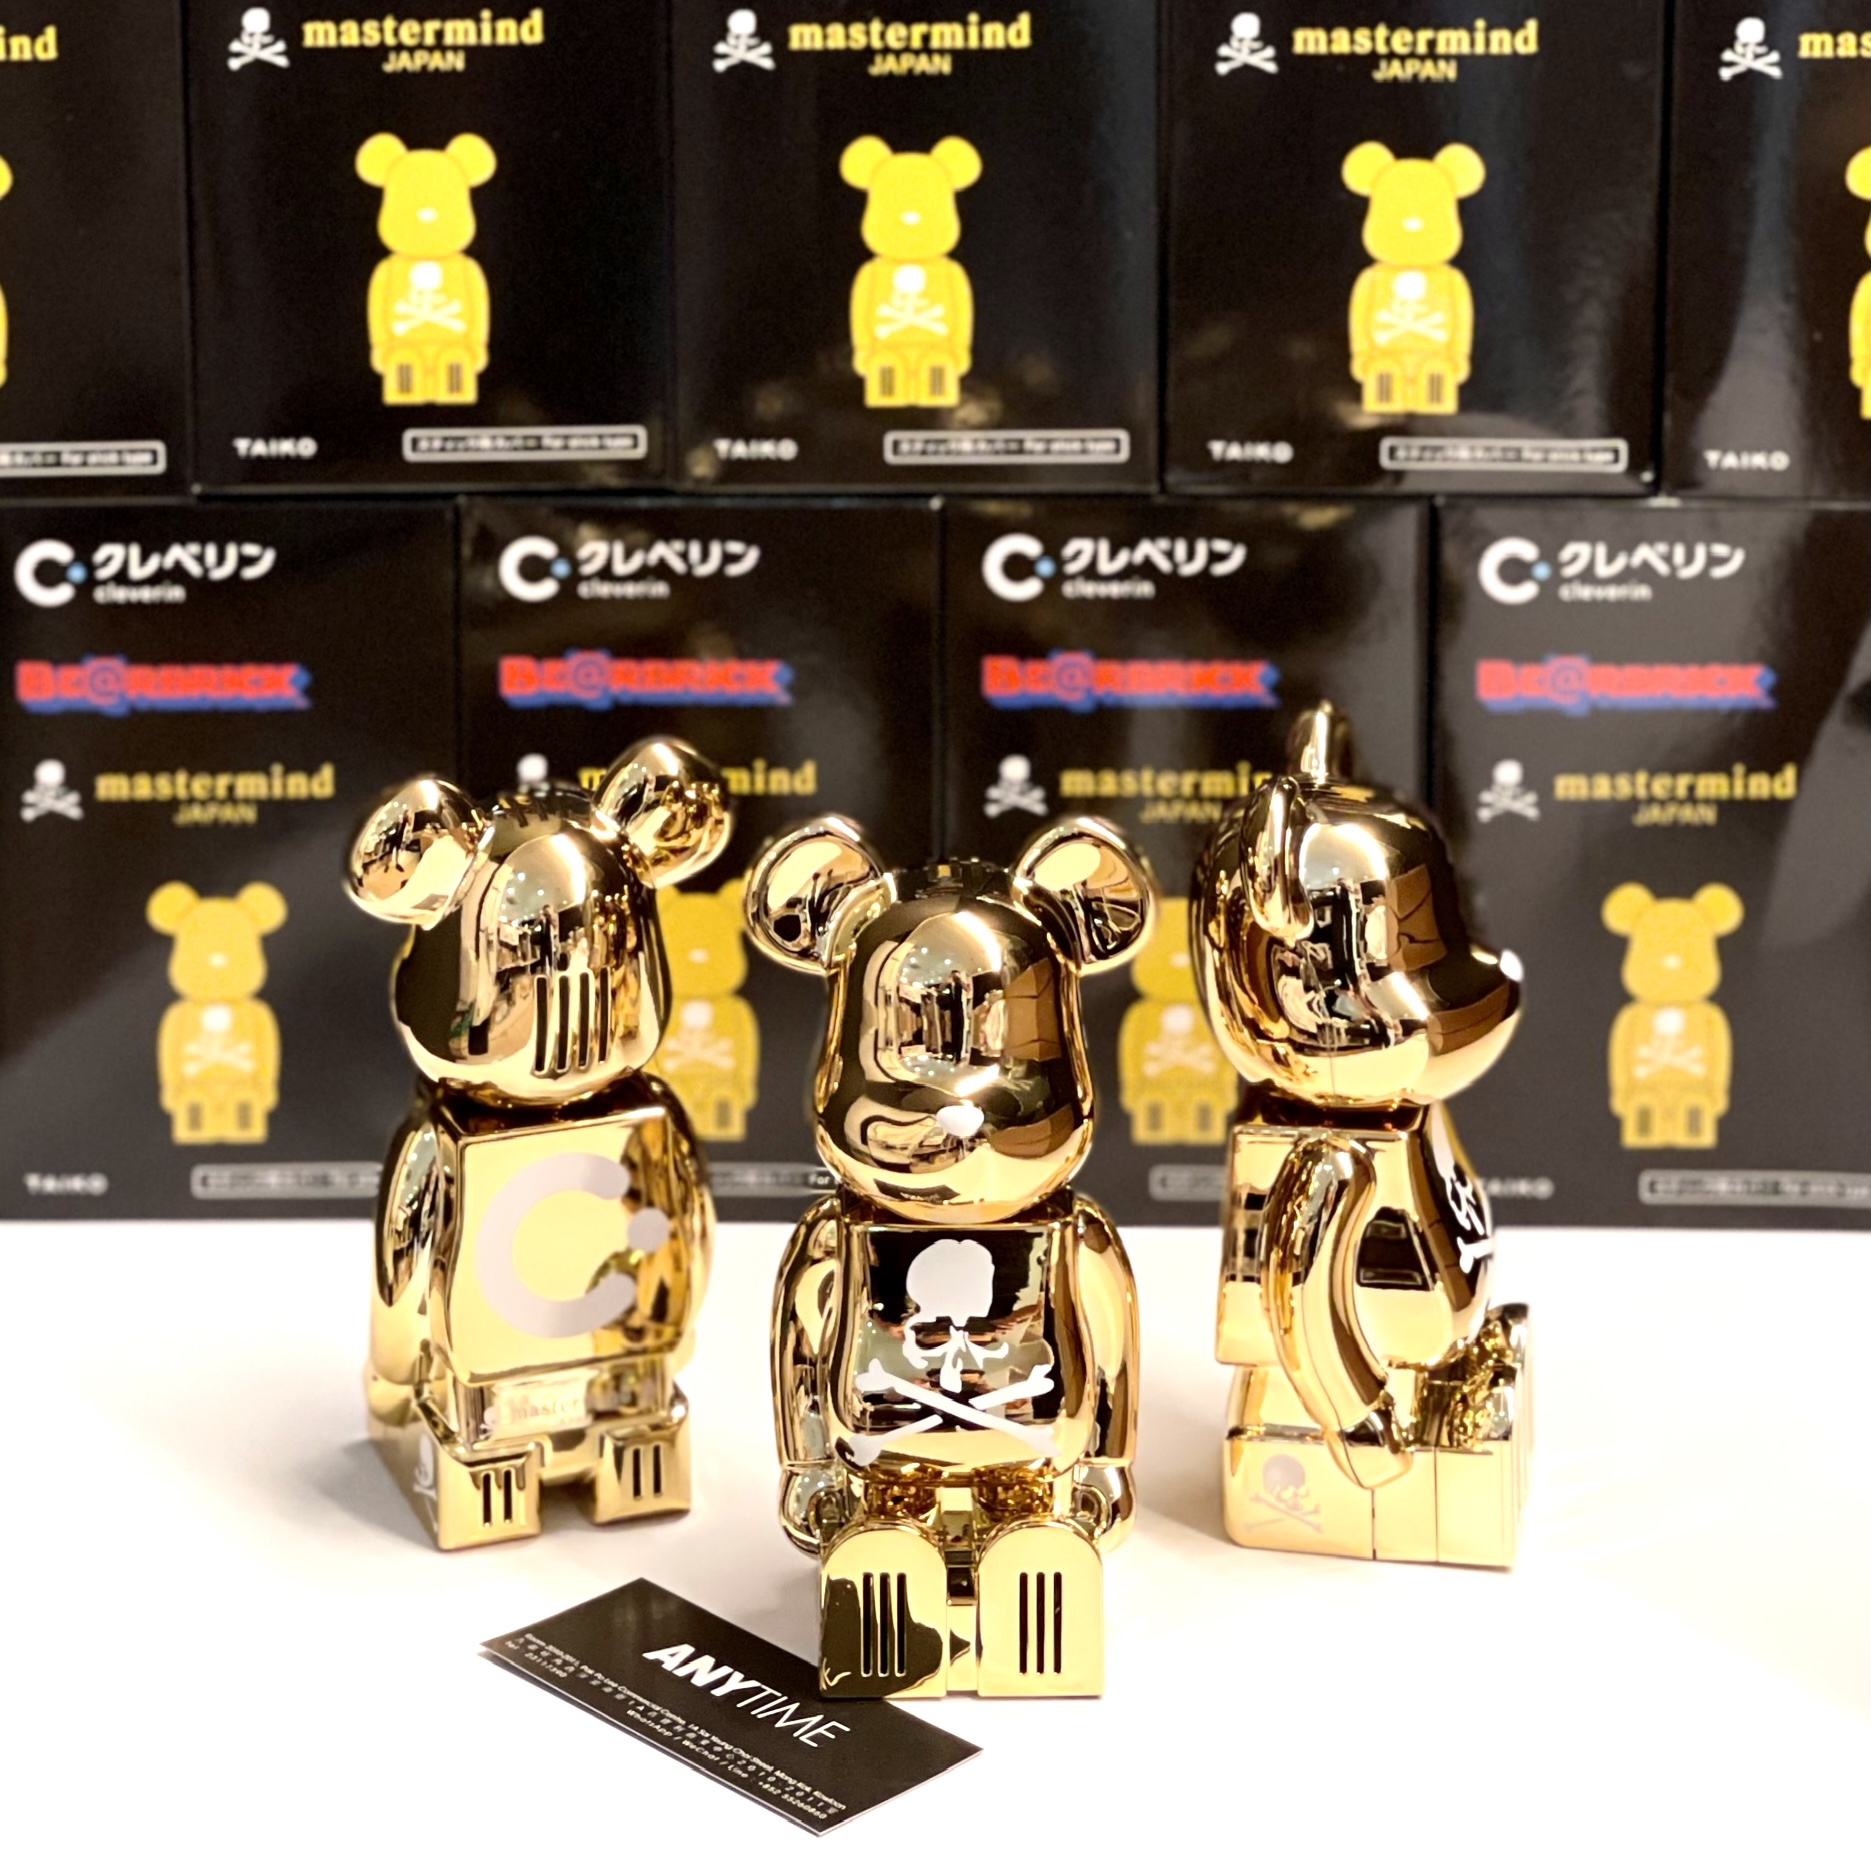 cleverin BE@RBRICK mastermind JAPAN ベアブリその他